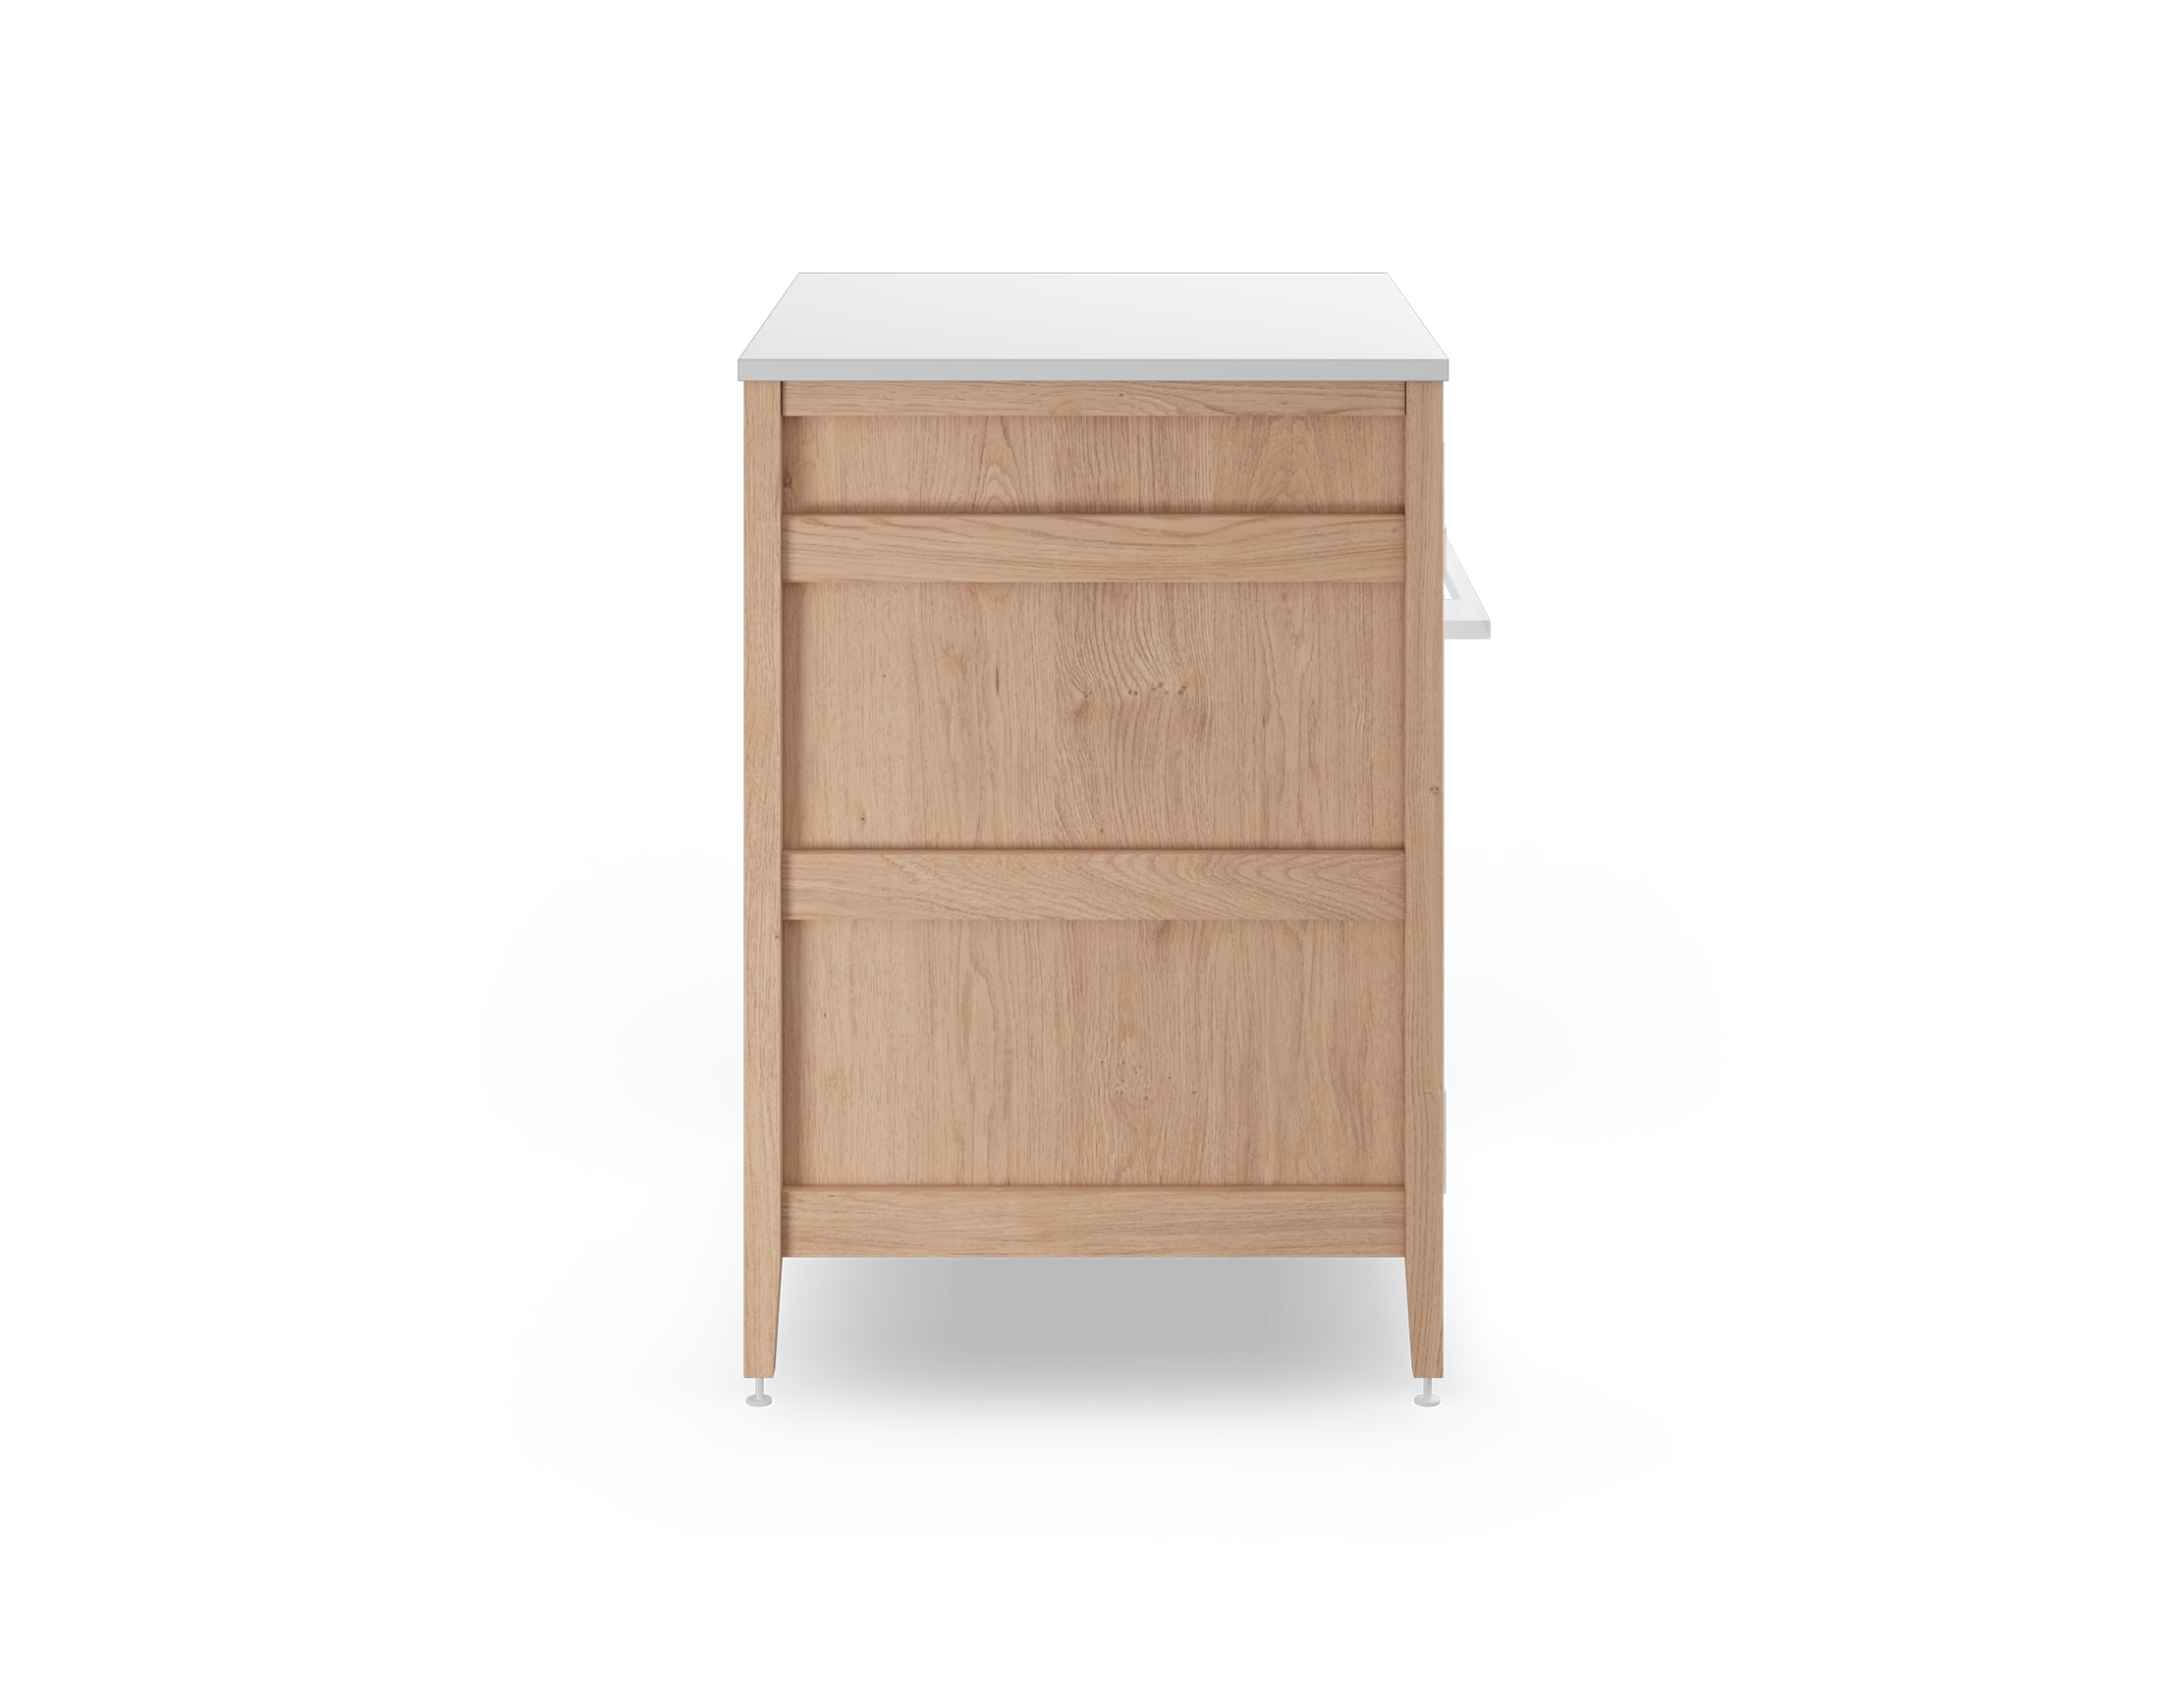 Coquo modular freestanding oven cabinet for the kitchen in natural oak. 